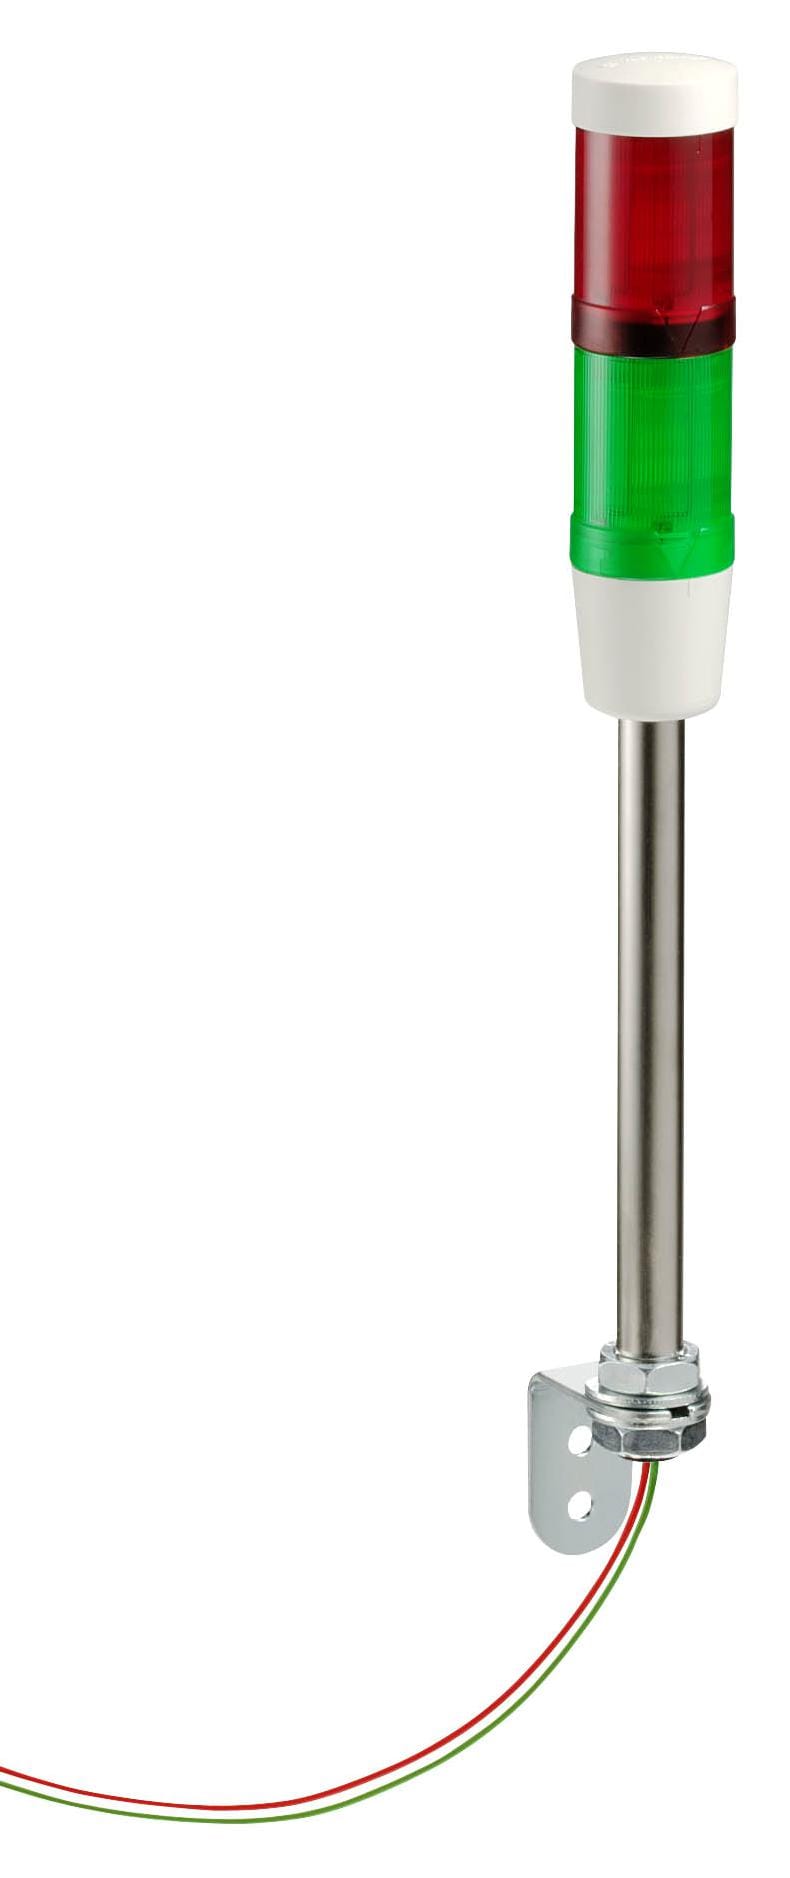 SCHNEIDER ELECTRIC Audio & Visual Signal Indicator Towers XVMB2RGSB 24 V LED RED GREEN SUPER BRIGHT SCHNEIDER ELECTRIC 3115958 XVMB2RGSB